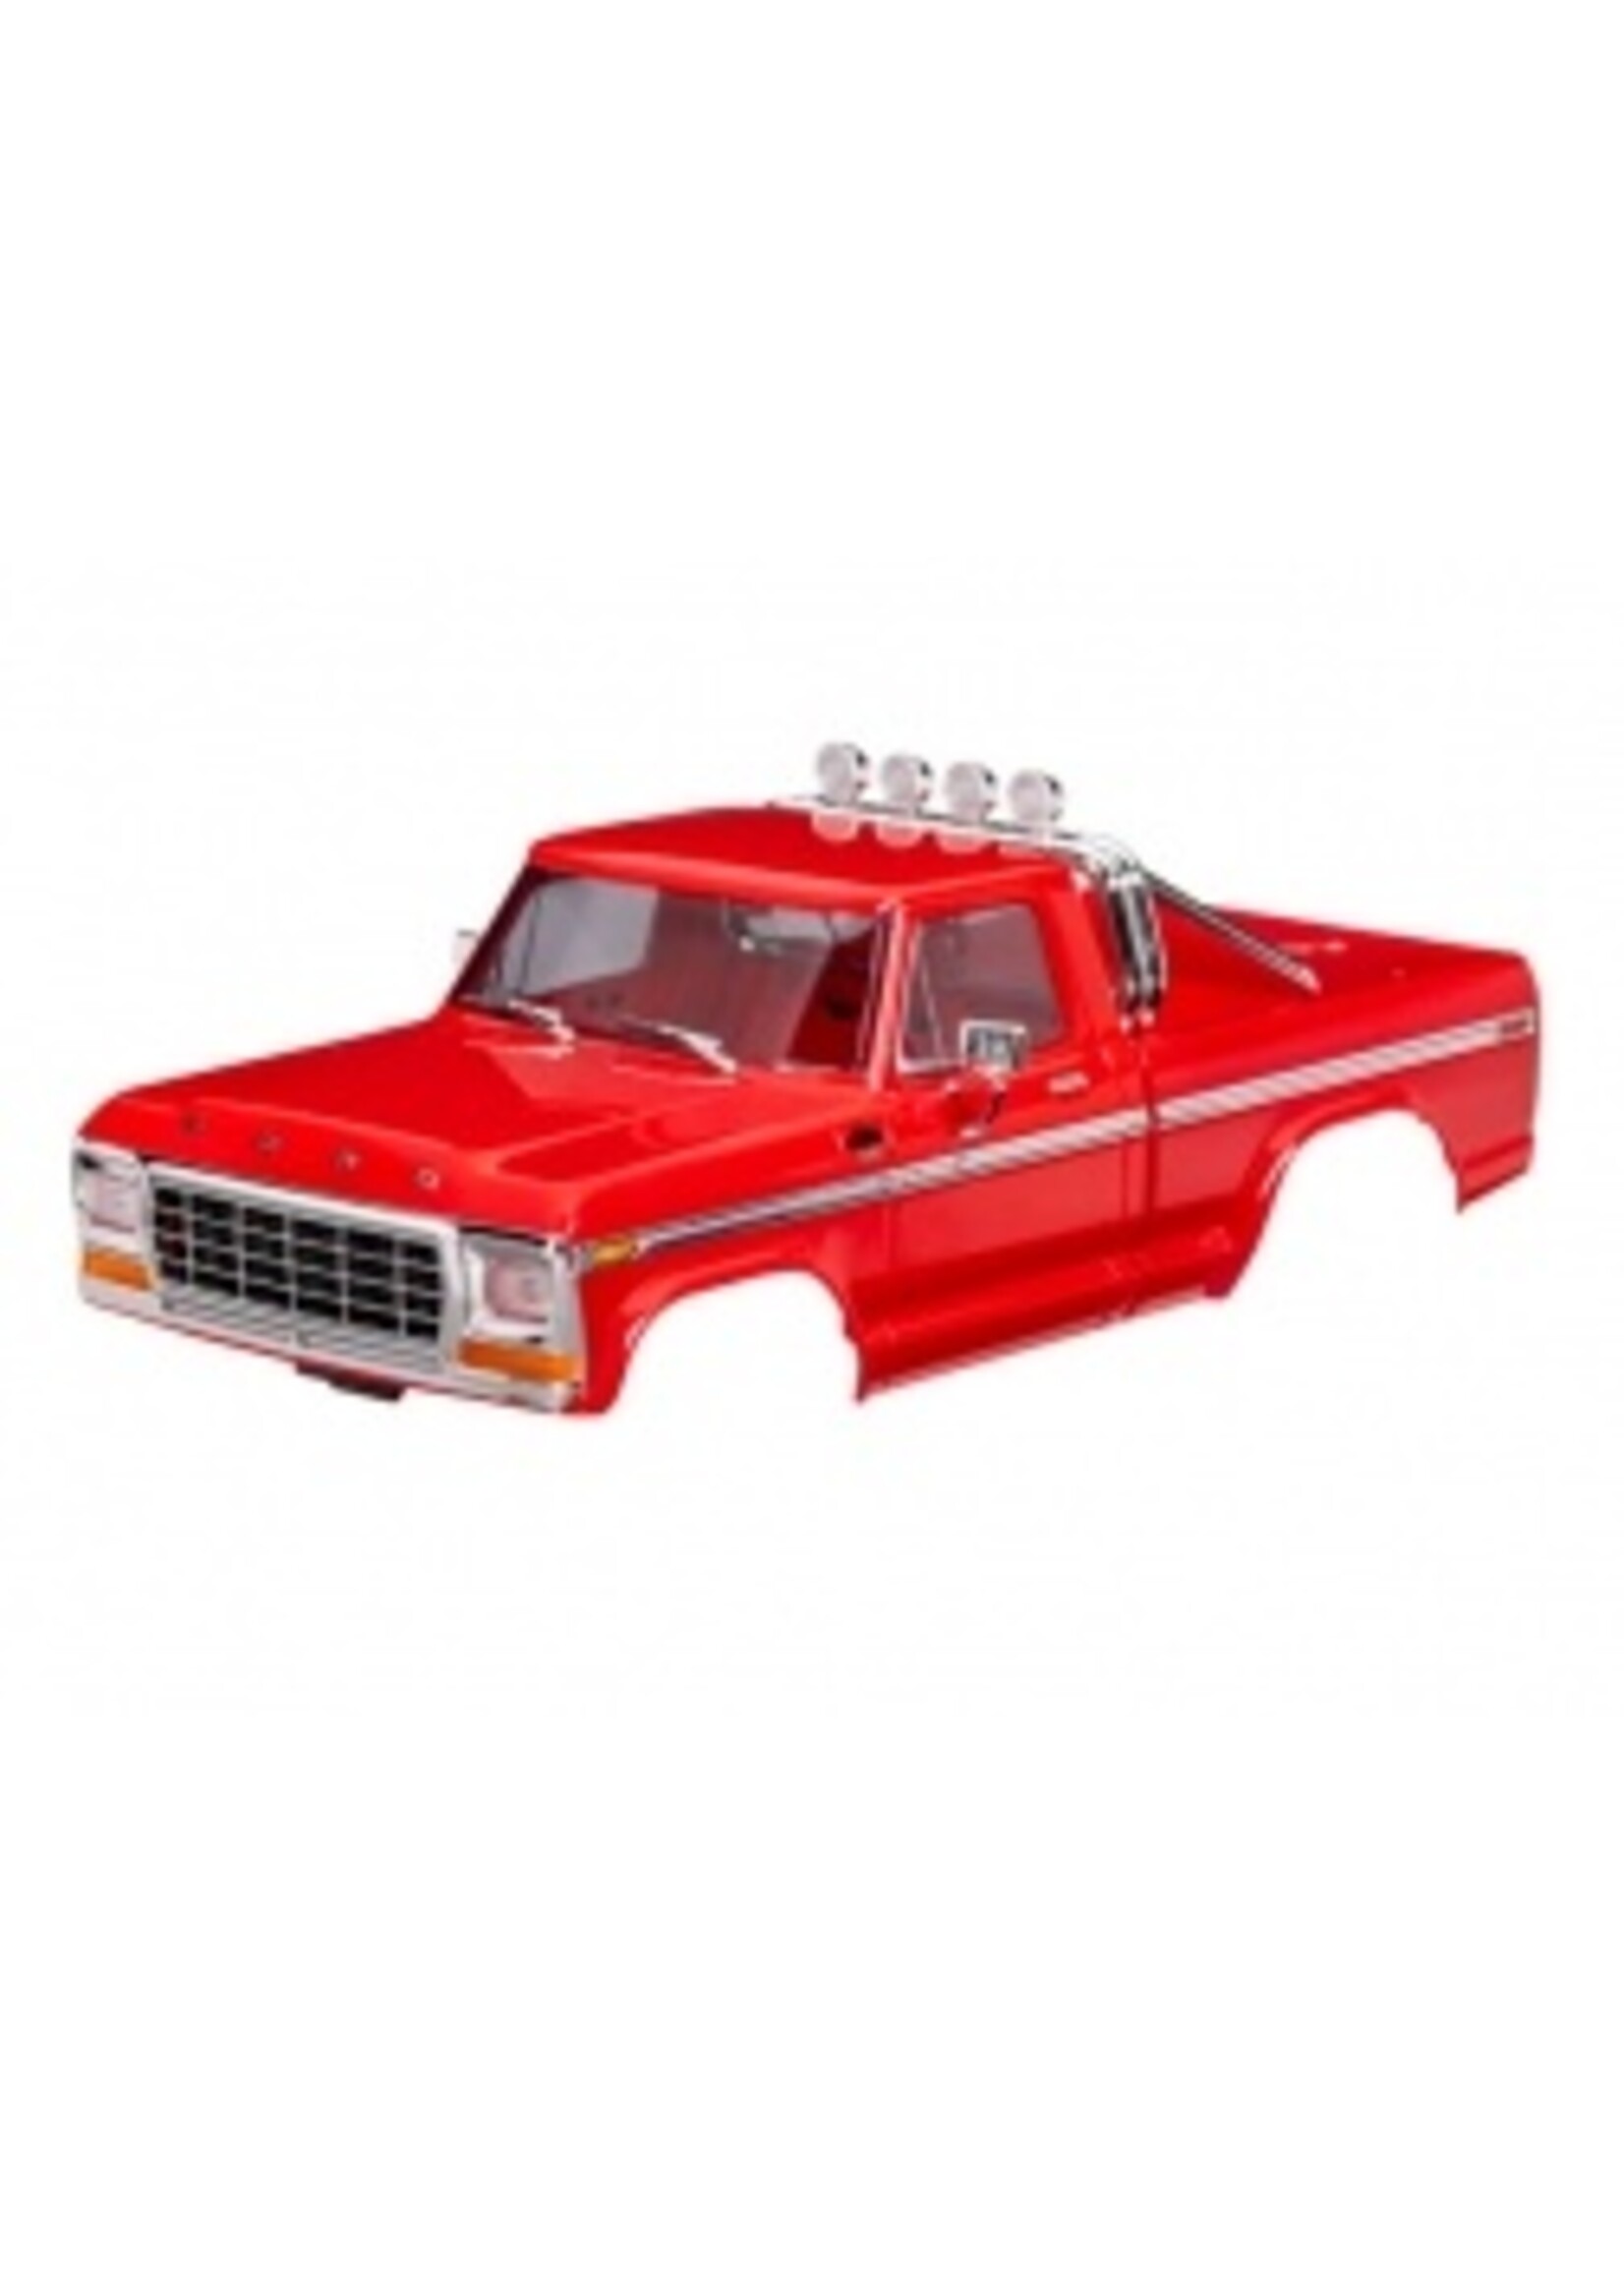 Traxxas 9812-RED - TRX-4M Ford F-150 Body - Red